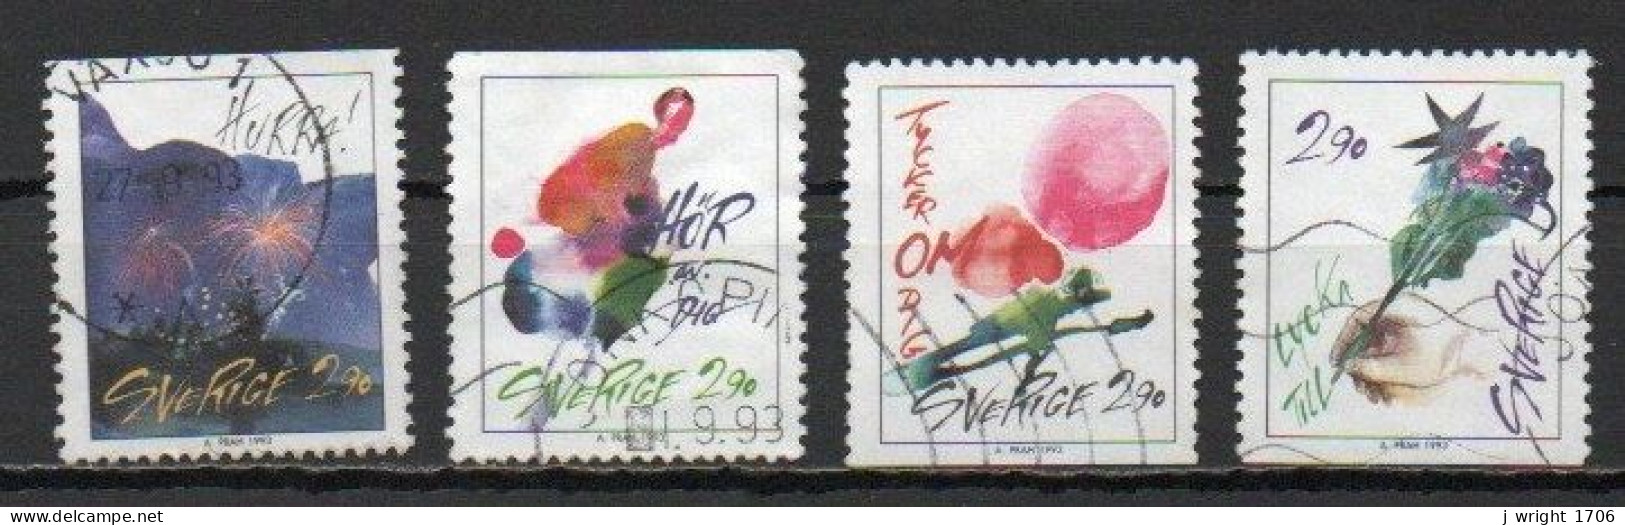 Sweden, 1993, Greetings Stamps, Set, USED - Usati